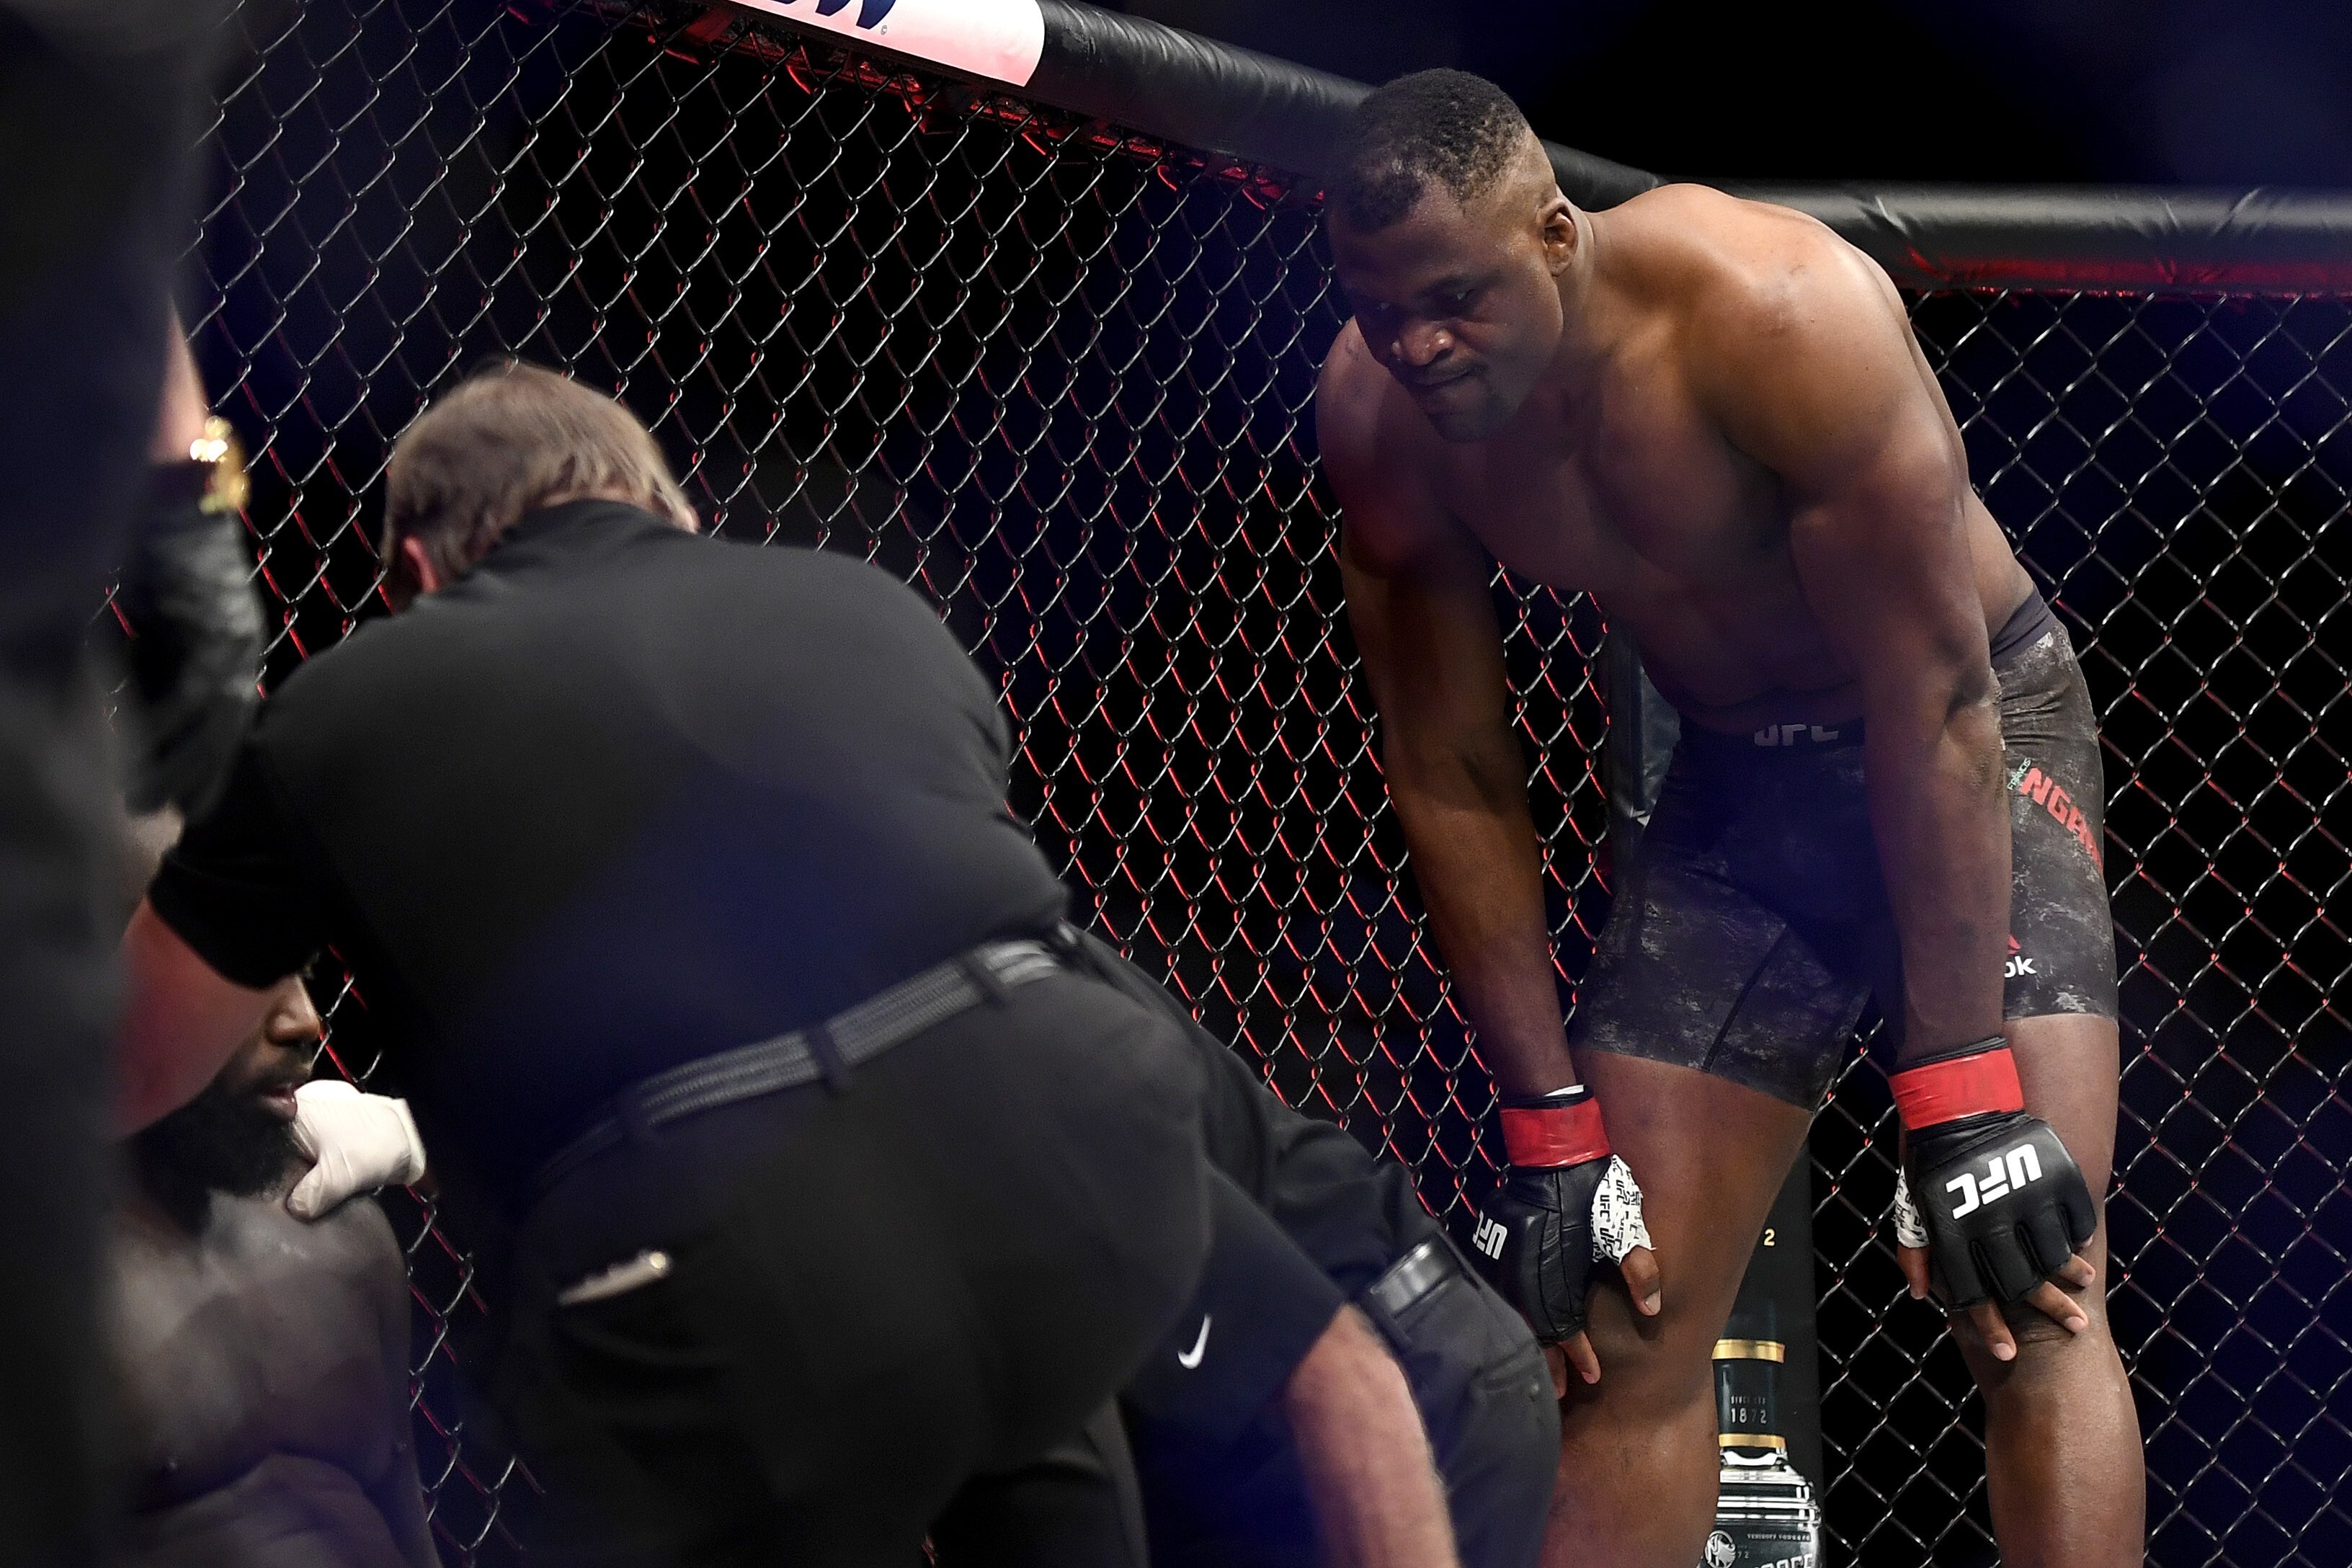 Francis Ngannou looks on as Jairzinho Rozenstruik receives attention after their heavyweight fight at UFC 249. Photo: AFP